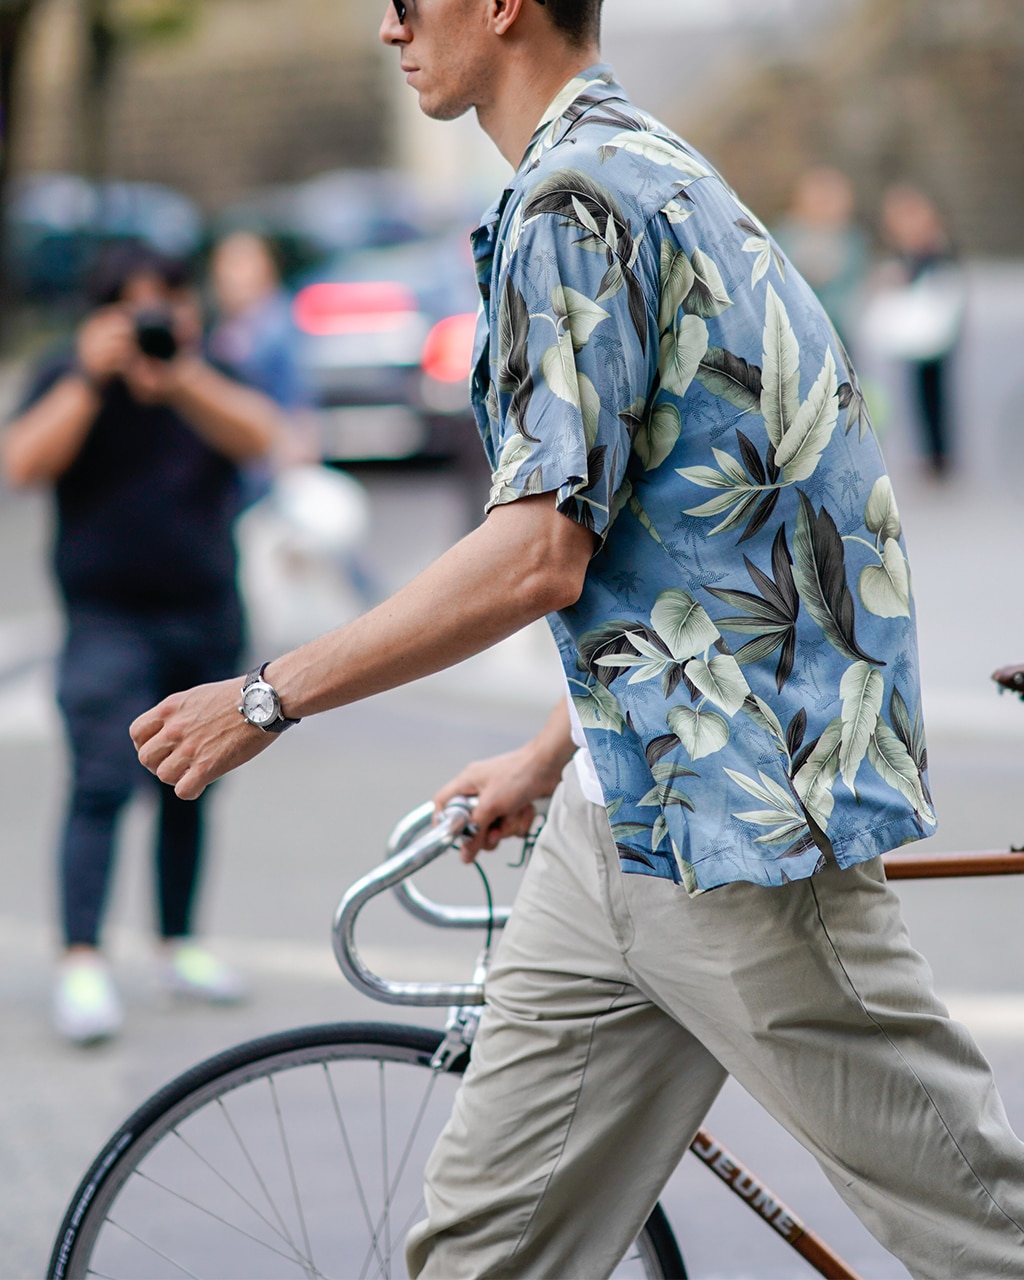 Three Stylish Ways To Dress For A Cycle Commute | The Journal | MR PORTER